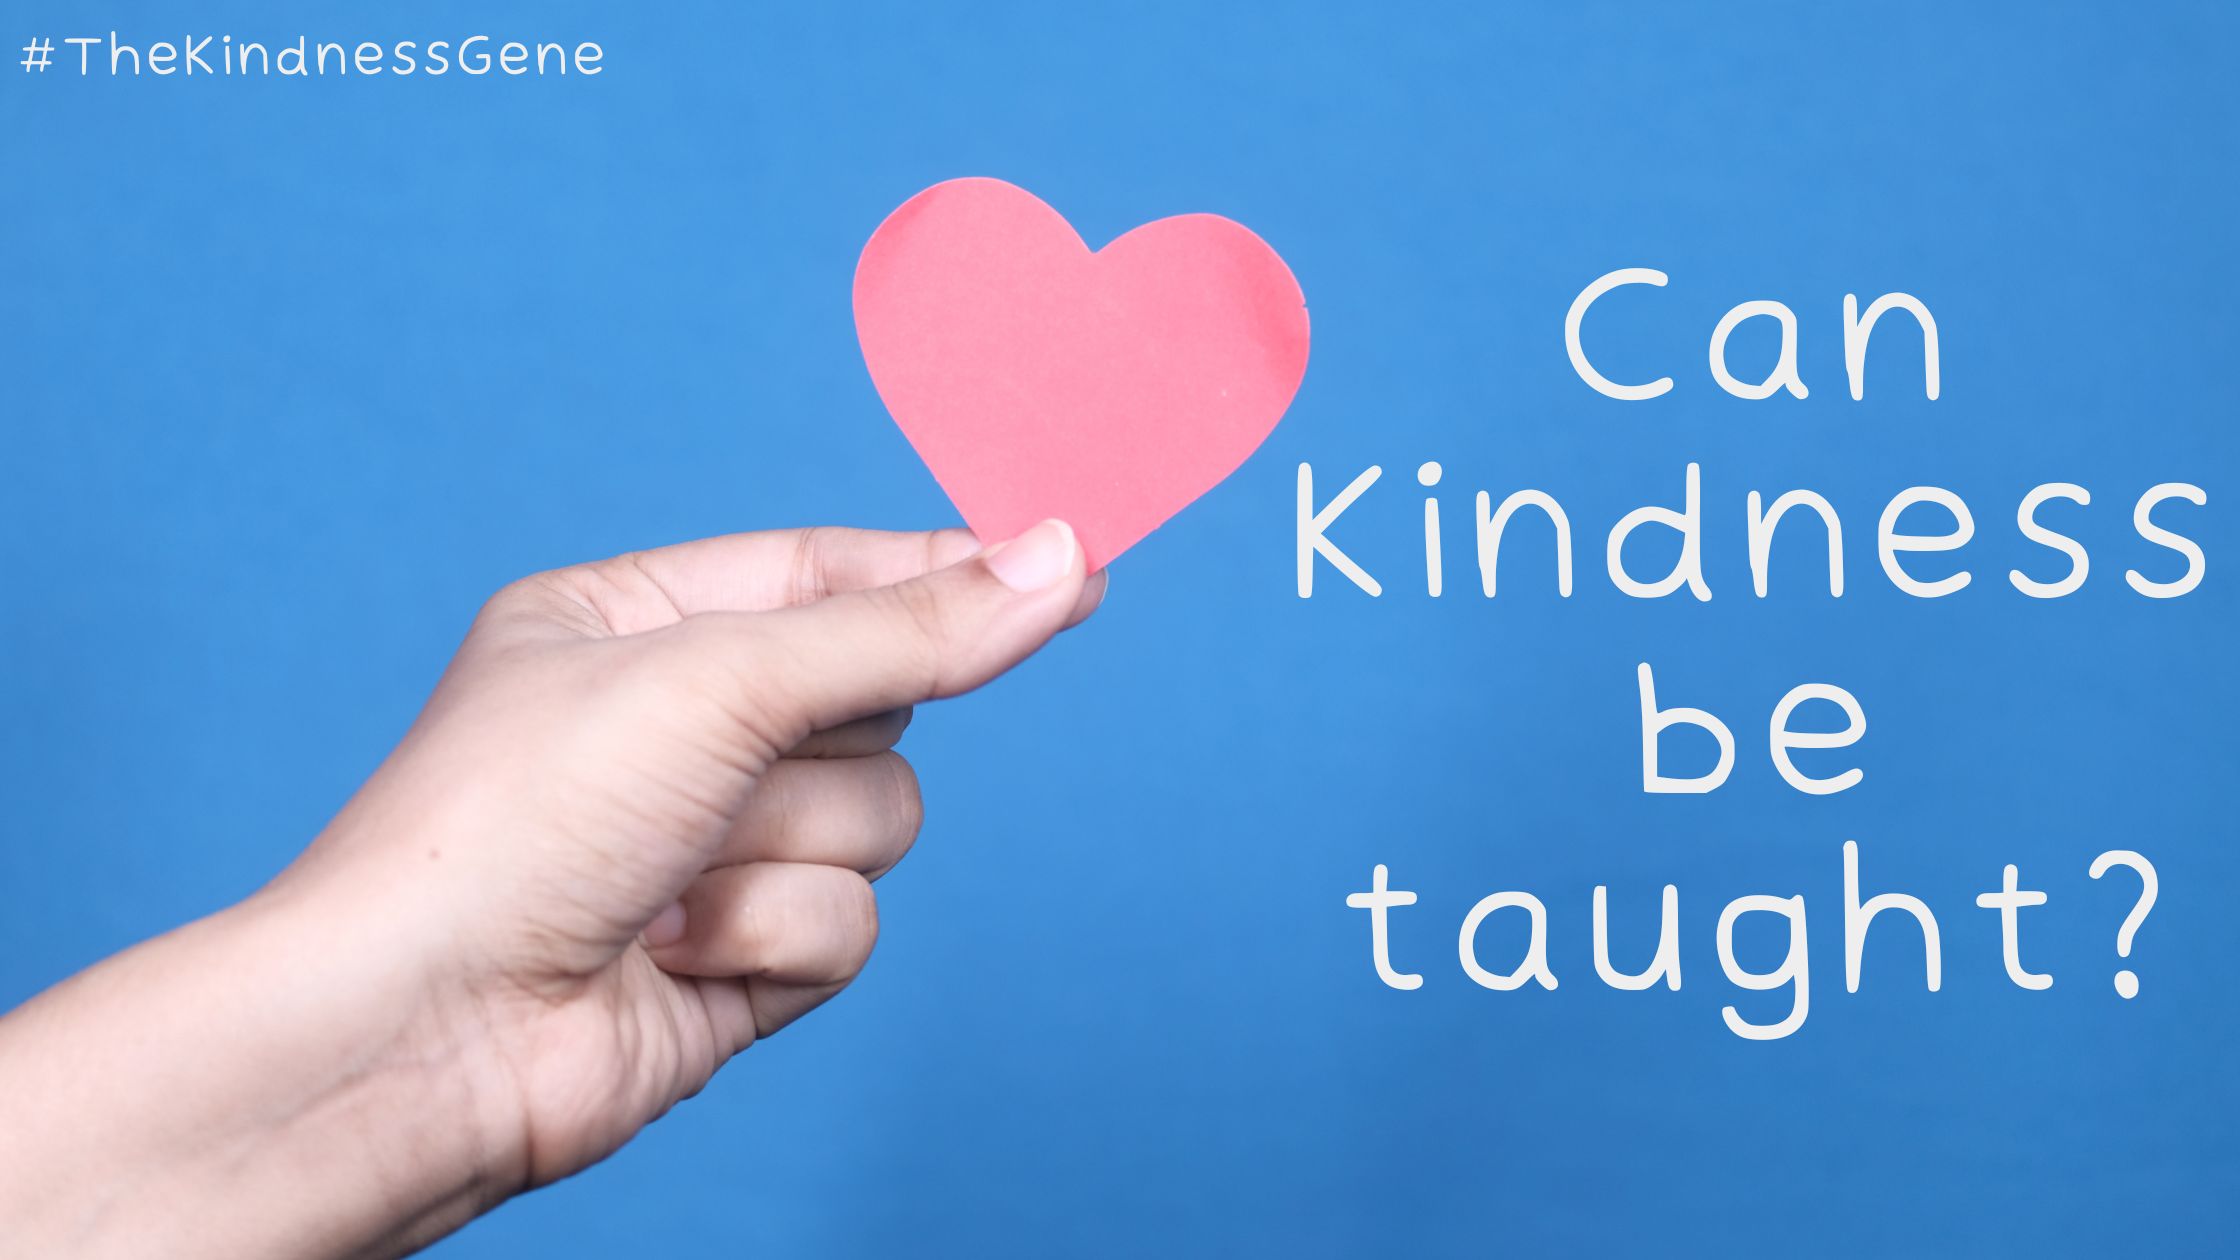 Can kindness be taught?